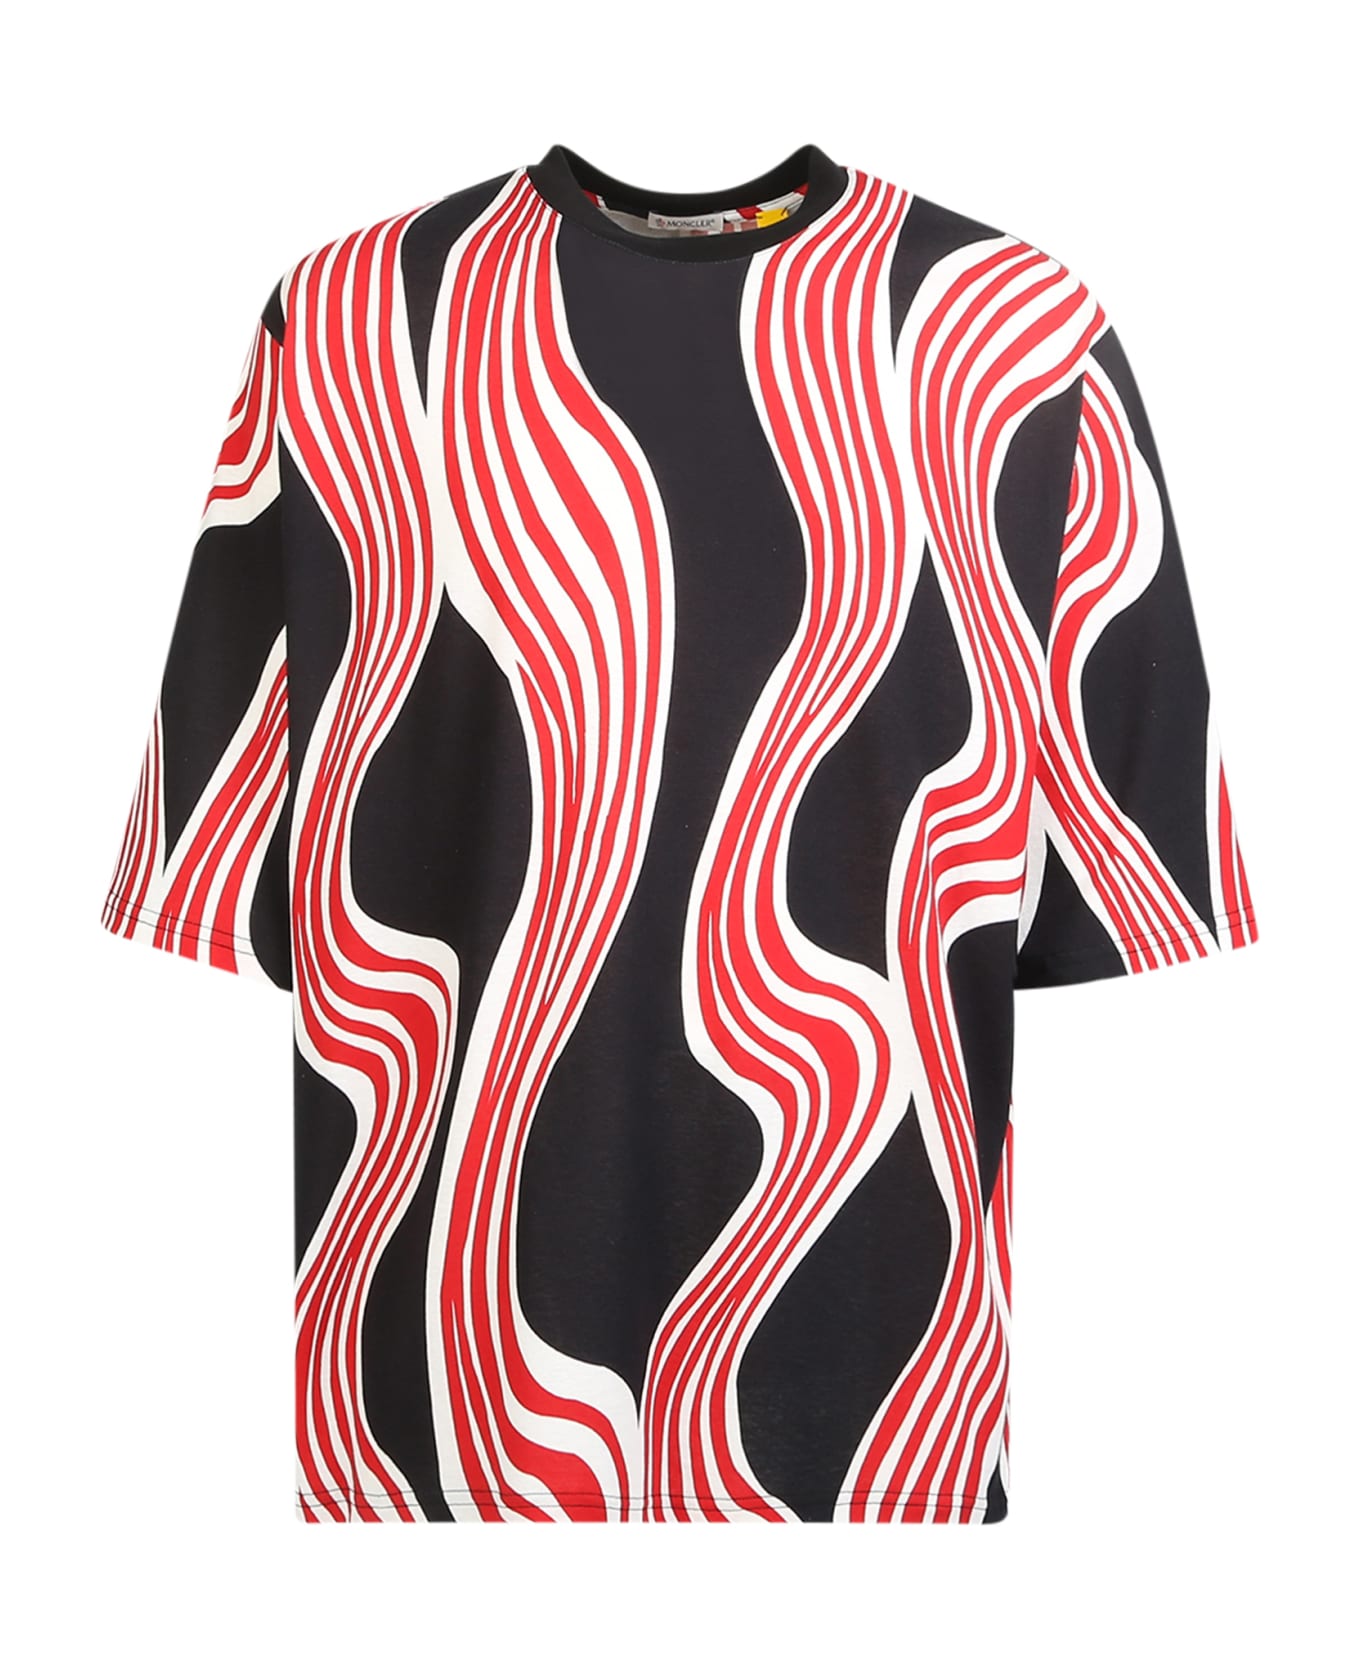 Moncler Genius Printed T-shirt - Moncler Jw Anderson - Red